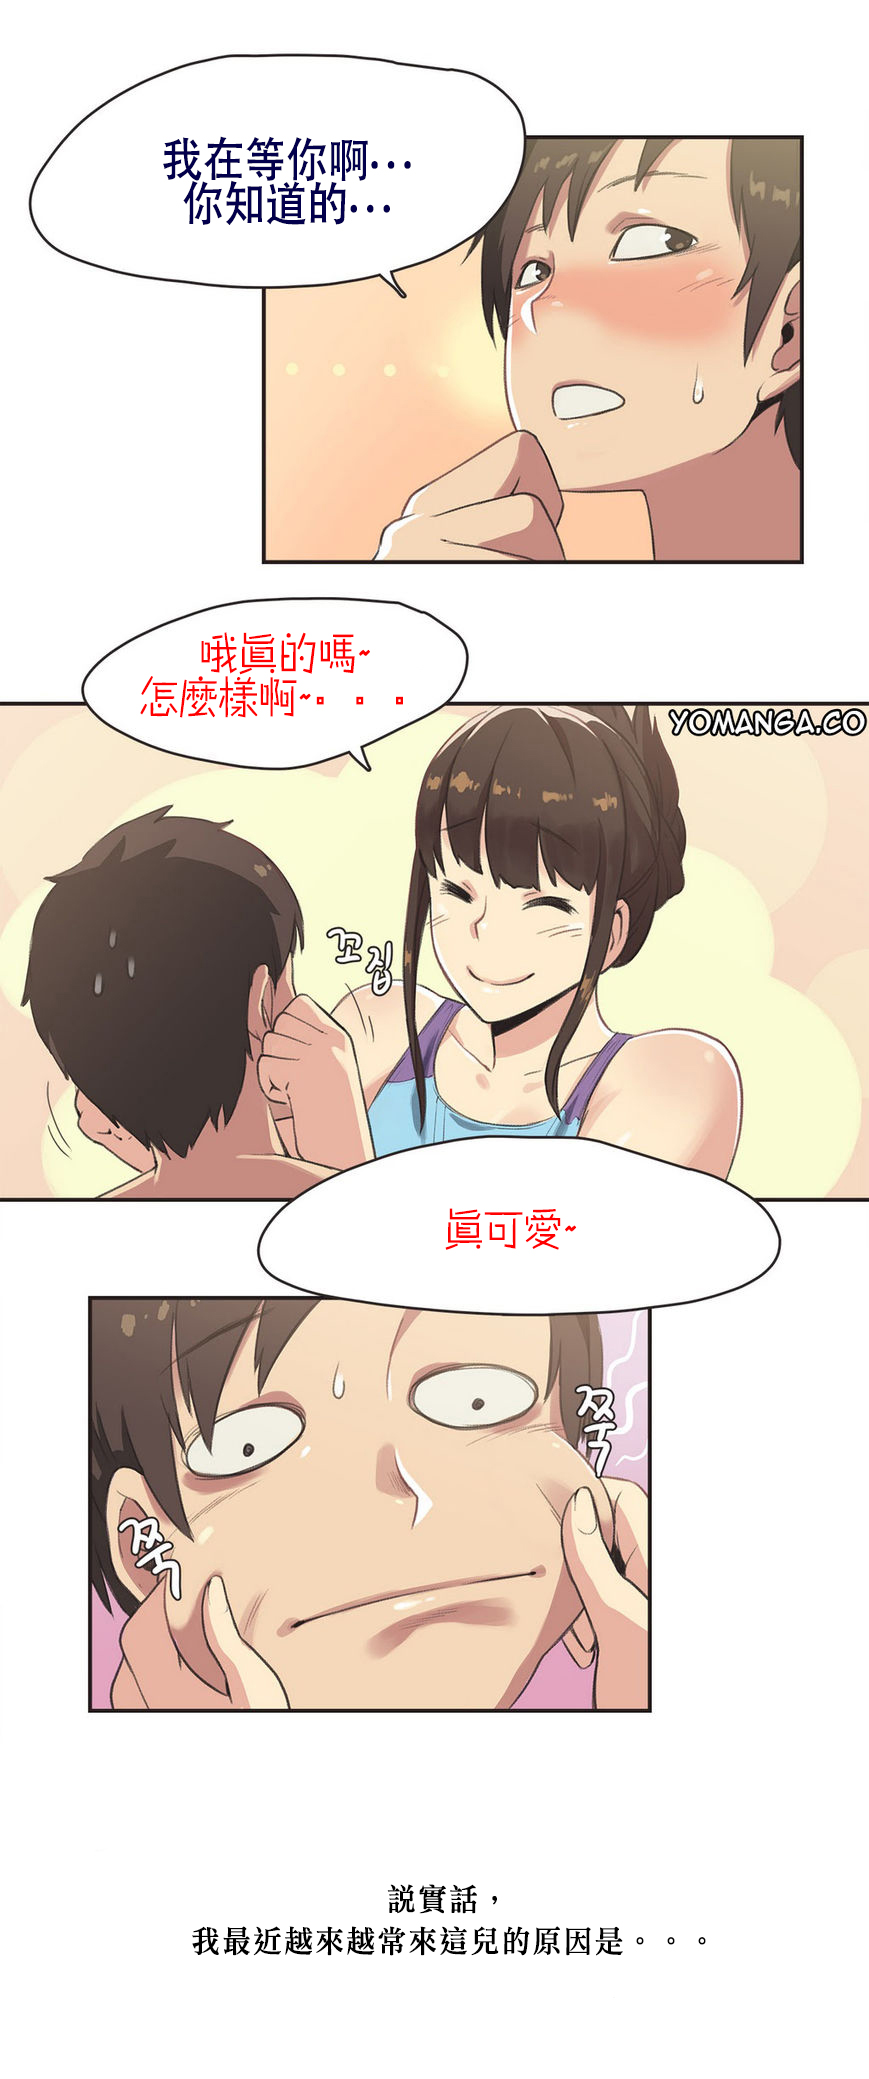 [Gamang] Sports Girl Ch.5 [Chinese] [高麗個人漢化] 